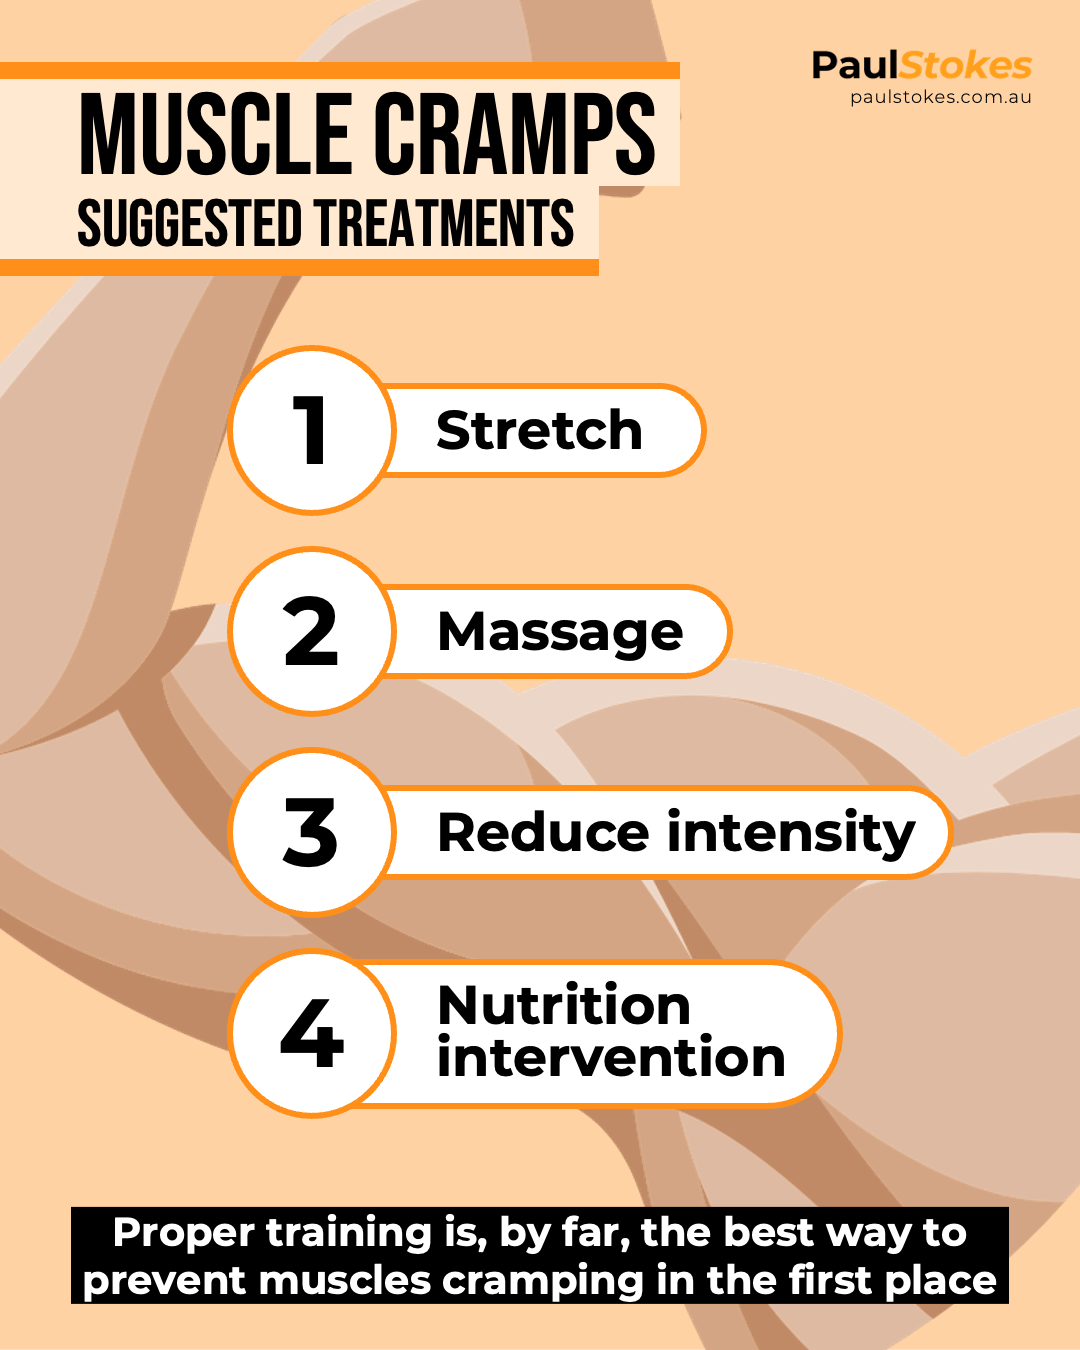 Infographic listing 4 suggested treatments for muscle cramps during exercise: Stretch; Massage; Reduce intensity; and Nutrition.